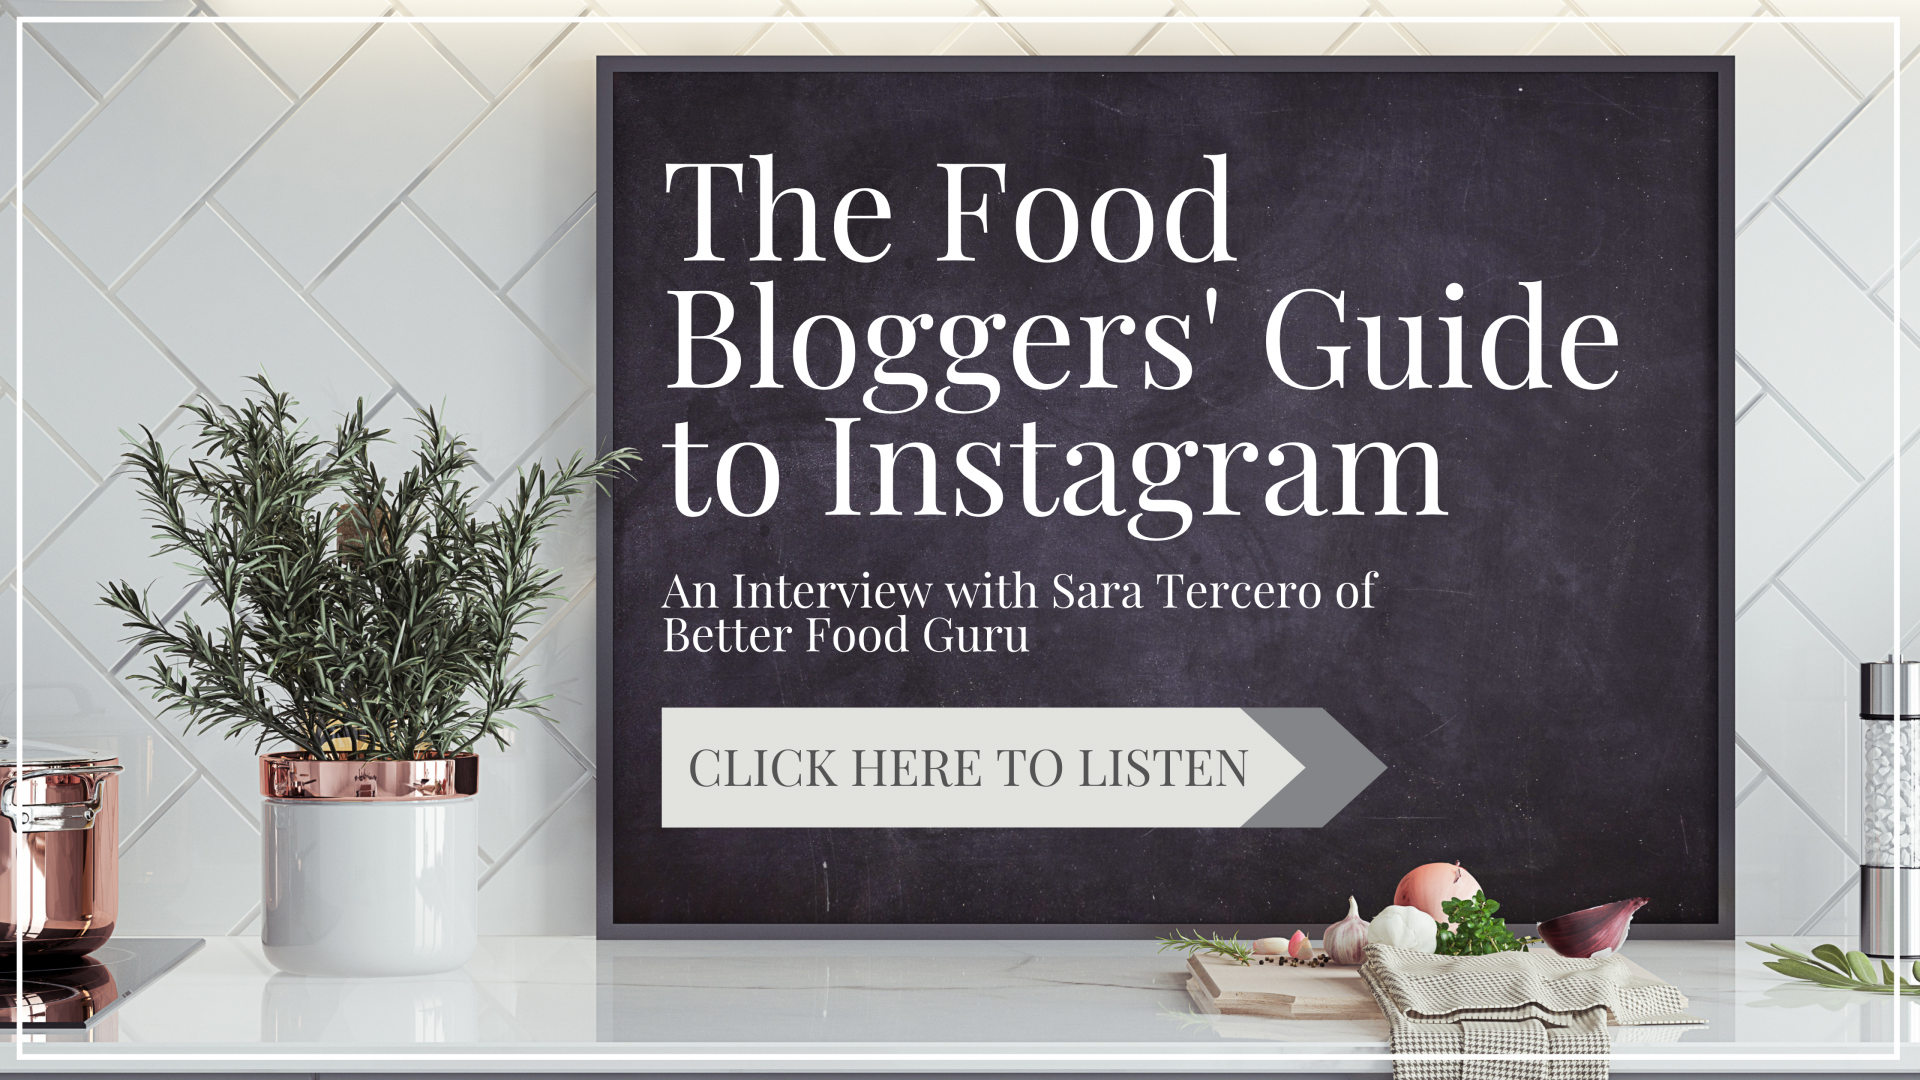 The Food Bloggers' Guide to Instagram